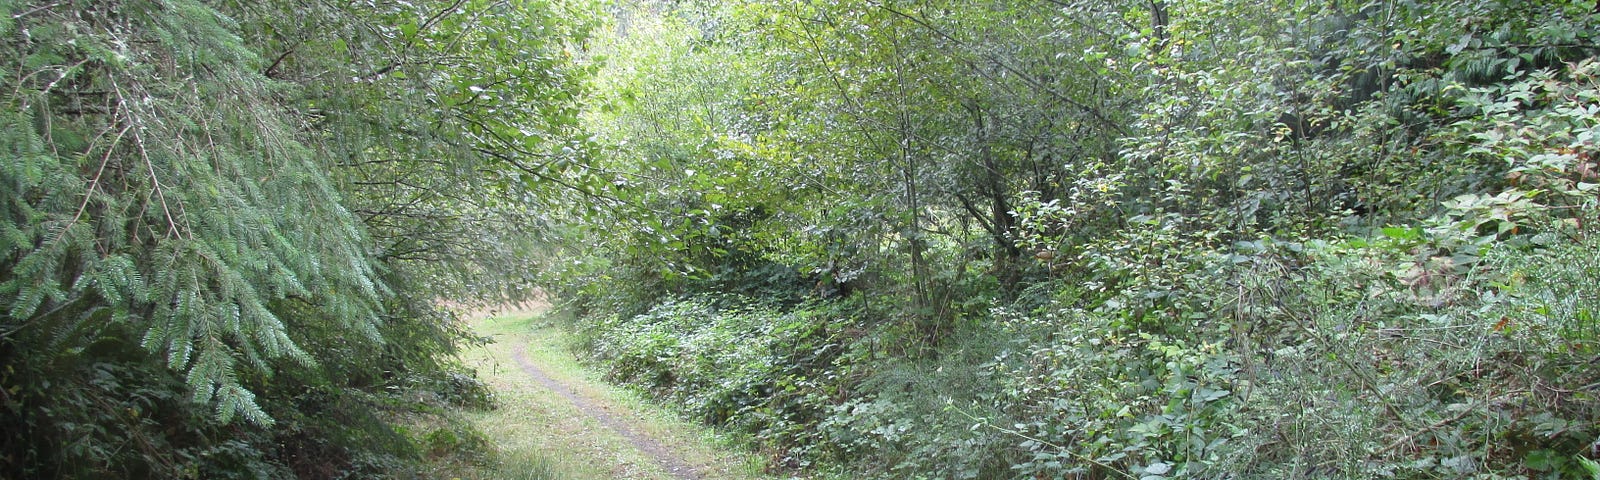 A photograph in greens and brown — pine boughs dipping into the frame from the upper right, blackberries, brambles, and assorted bushes and shrubs from the left, and a narrow trail fringed with well-trodden grass down the middle, triangulating into the distance.